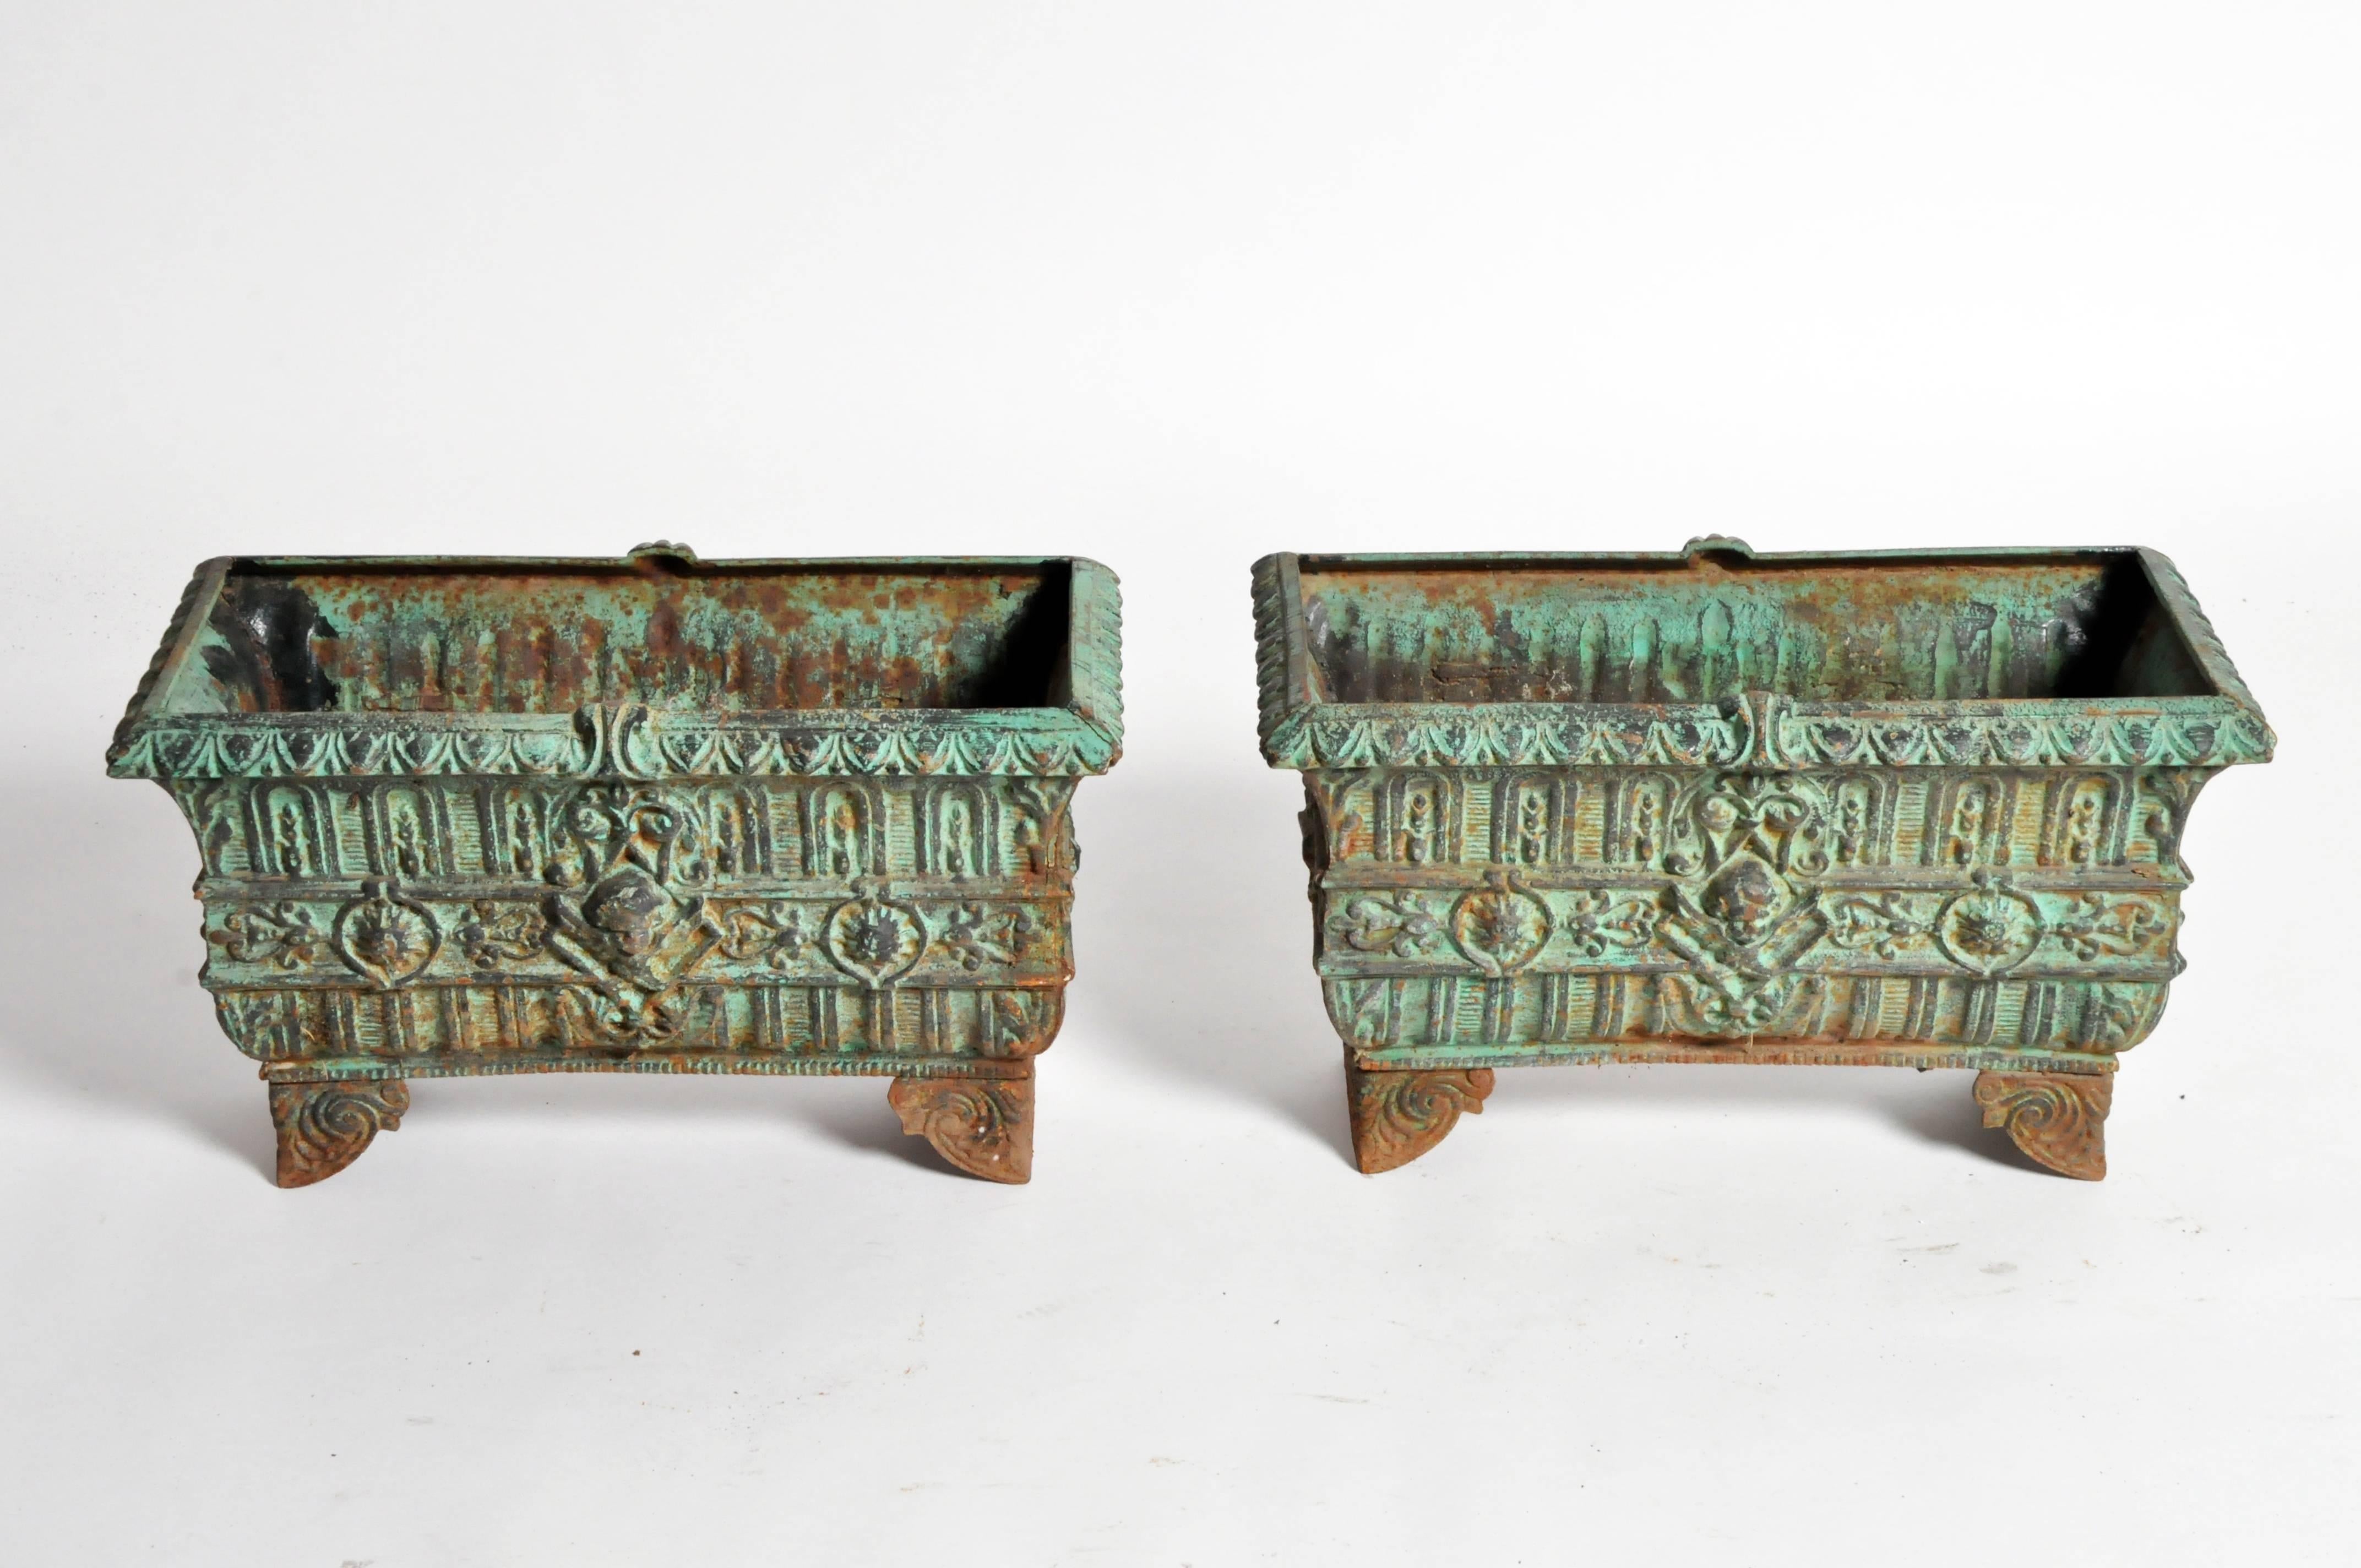 These stunning set of cast iron garden planters with Baroque motifs, putti, and scrolled feet. They are from France and the original blue-green patina is in excellent condition.